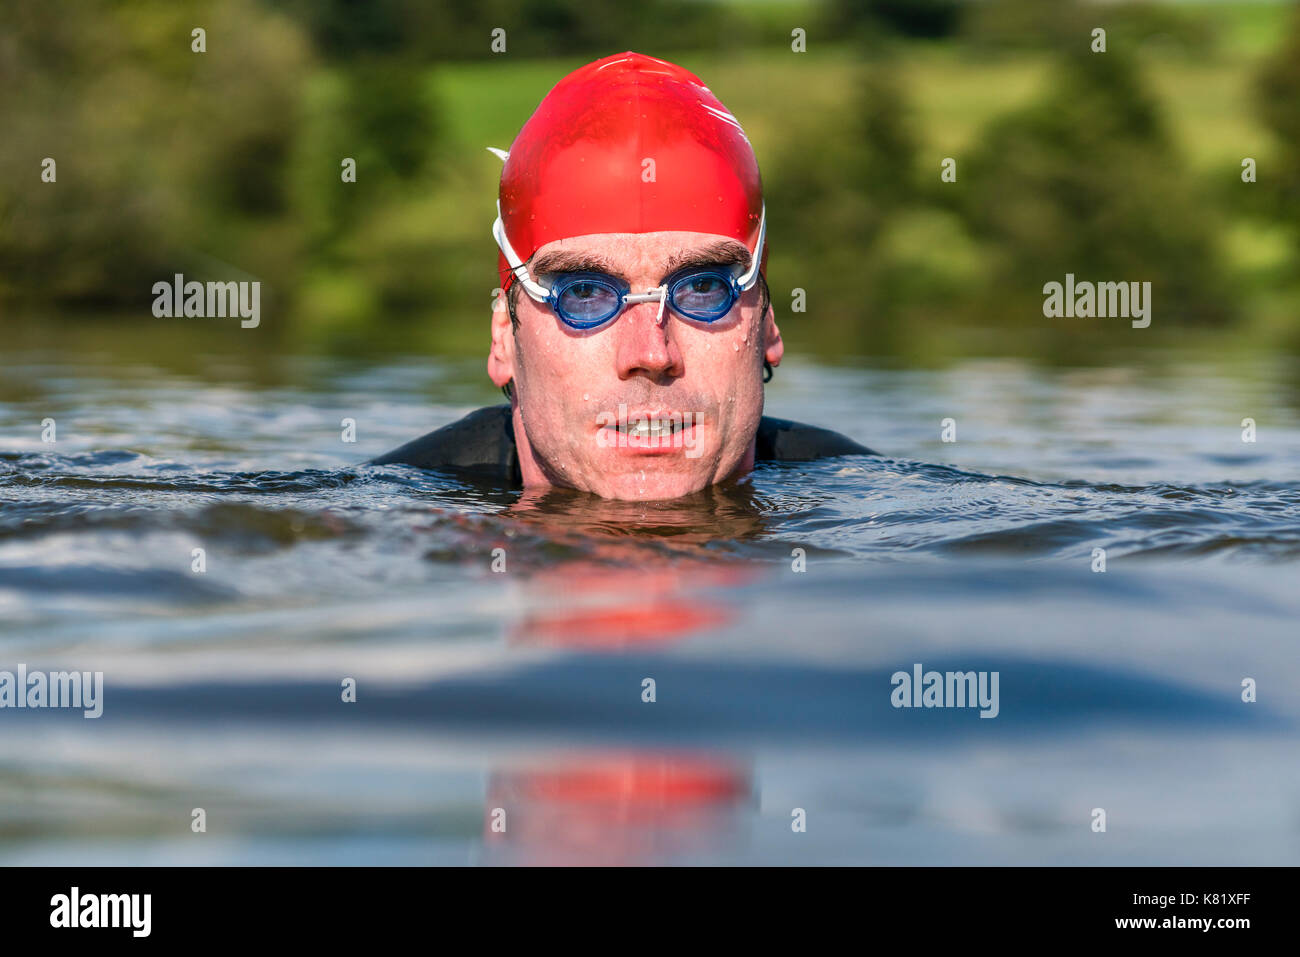 Man, 39 years old, wearing a wetsuit, swimming in the lake, Aichstruter Stausee, Baden-Württemberg, Germany Stock Photo